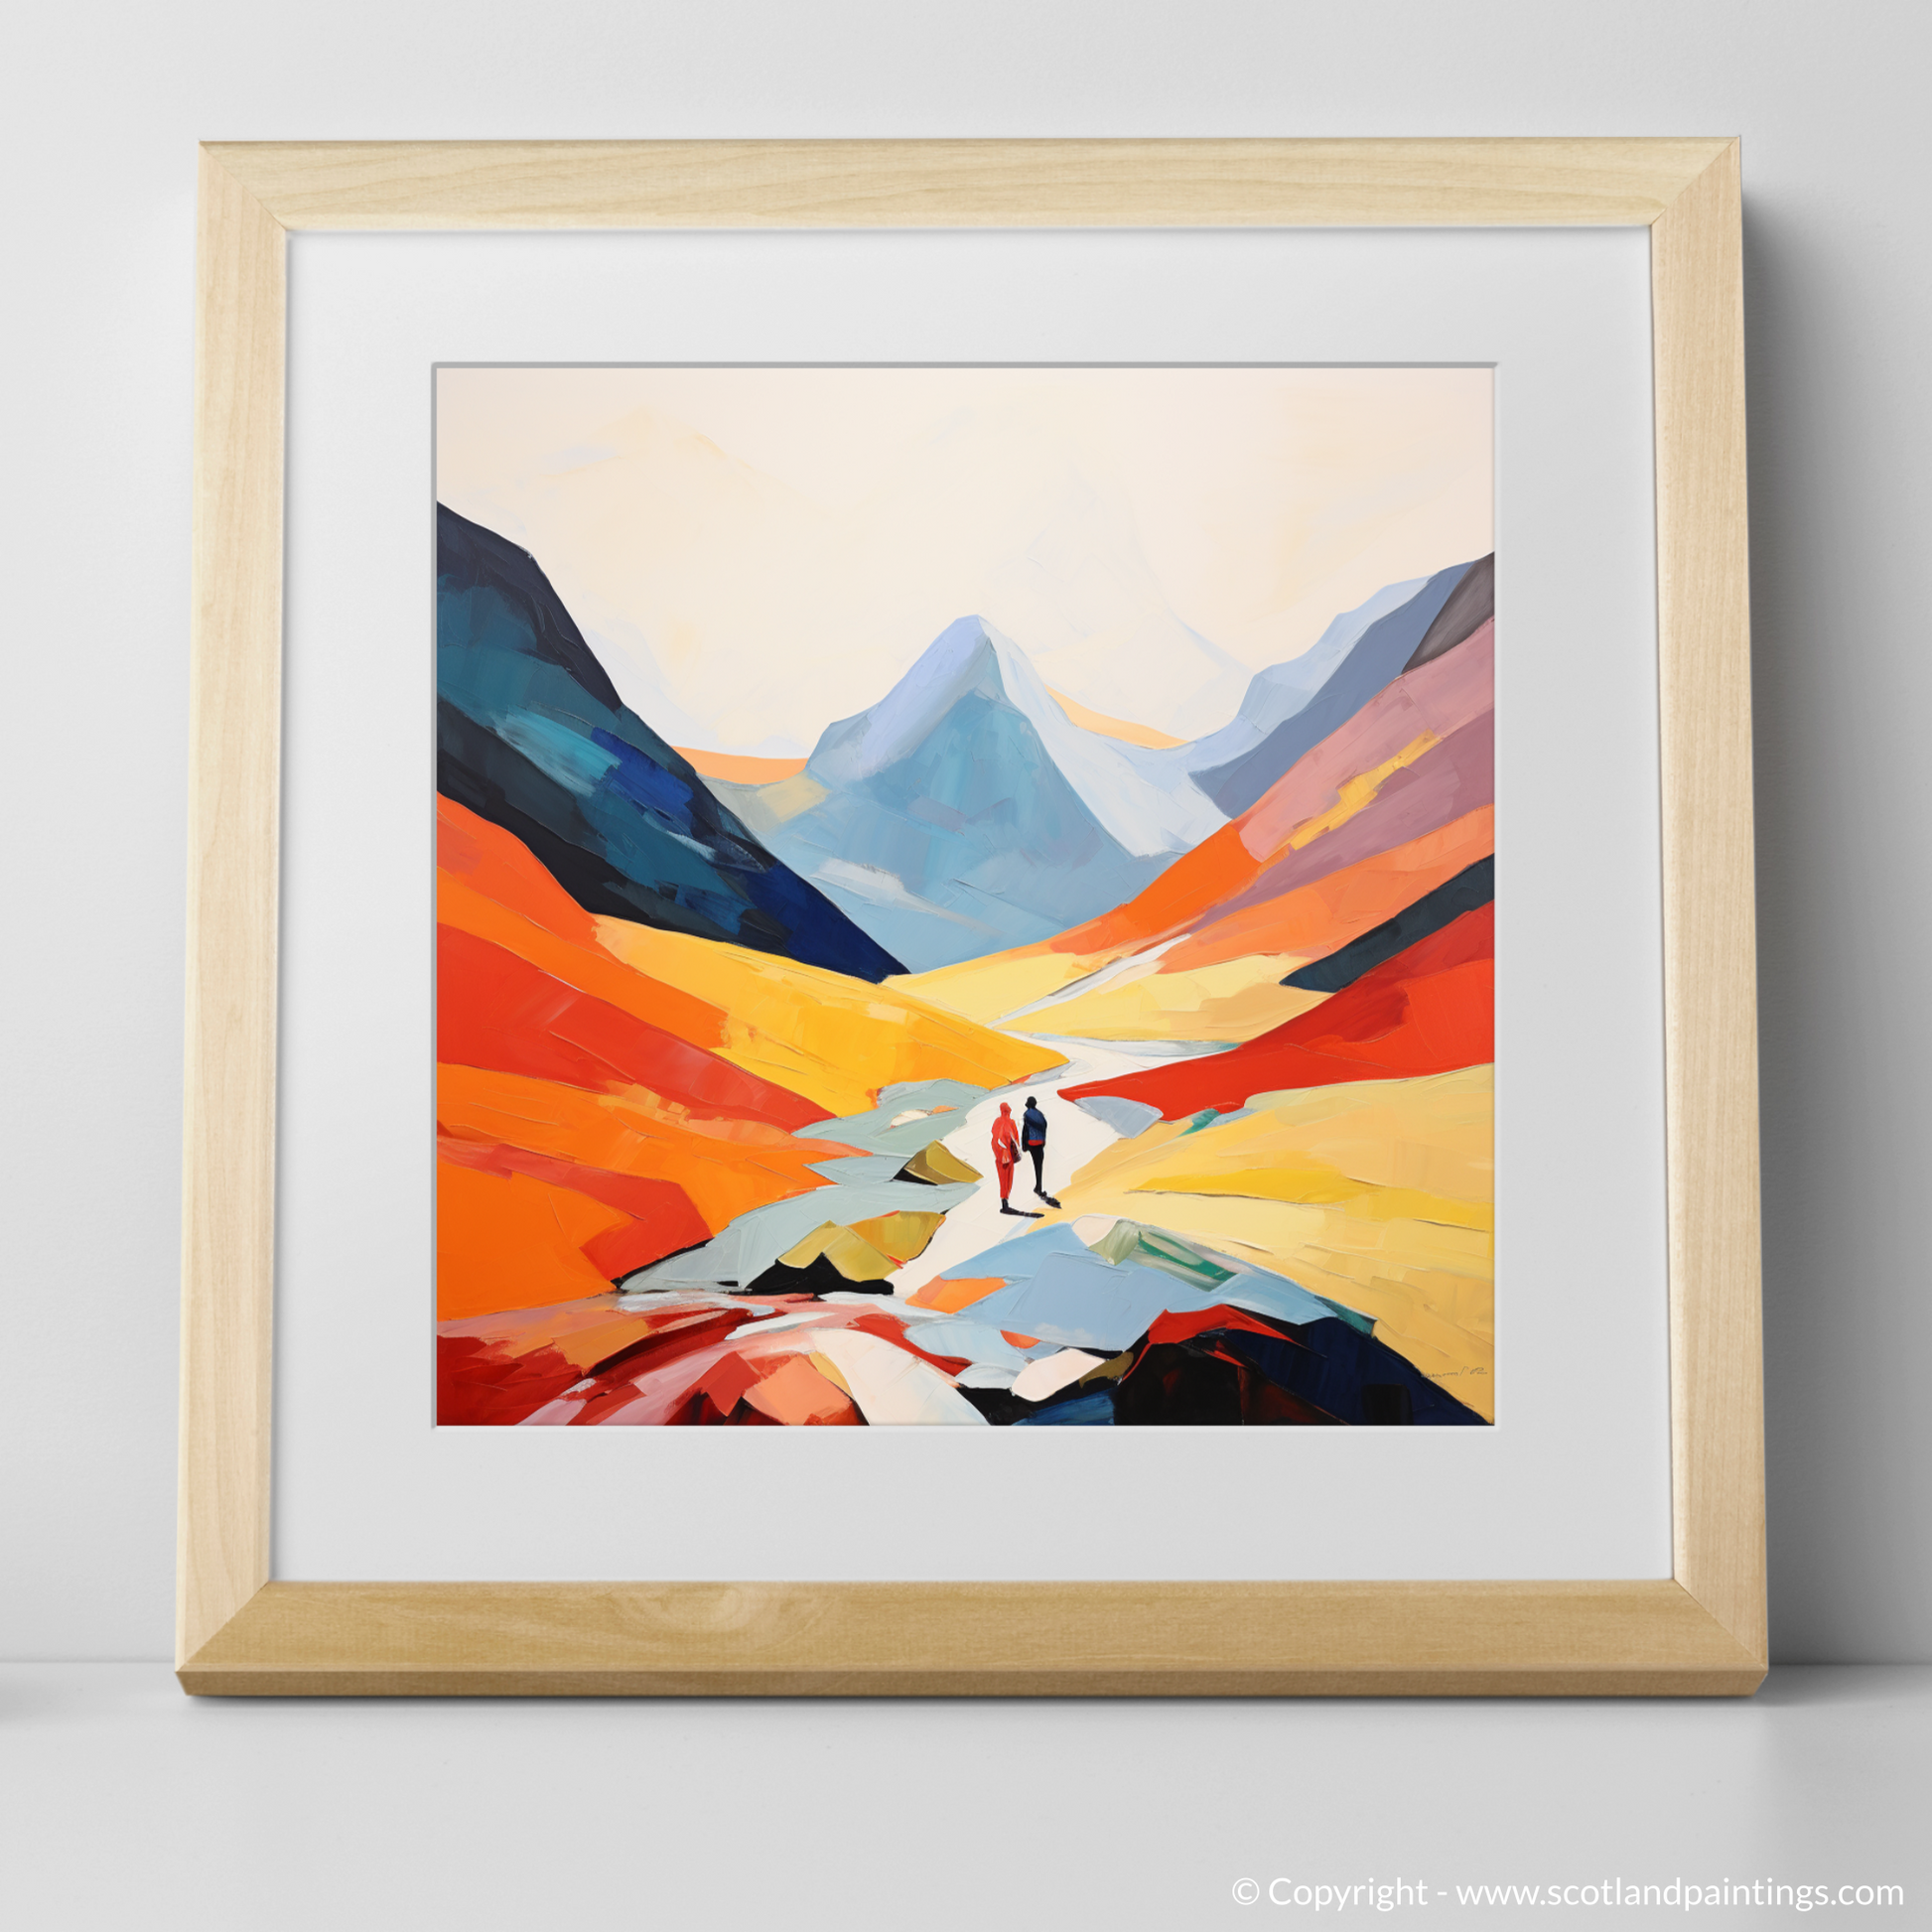 Art Print of Hikers in Glencoe with a natural frame